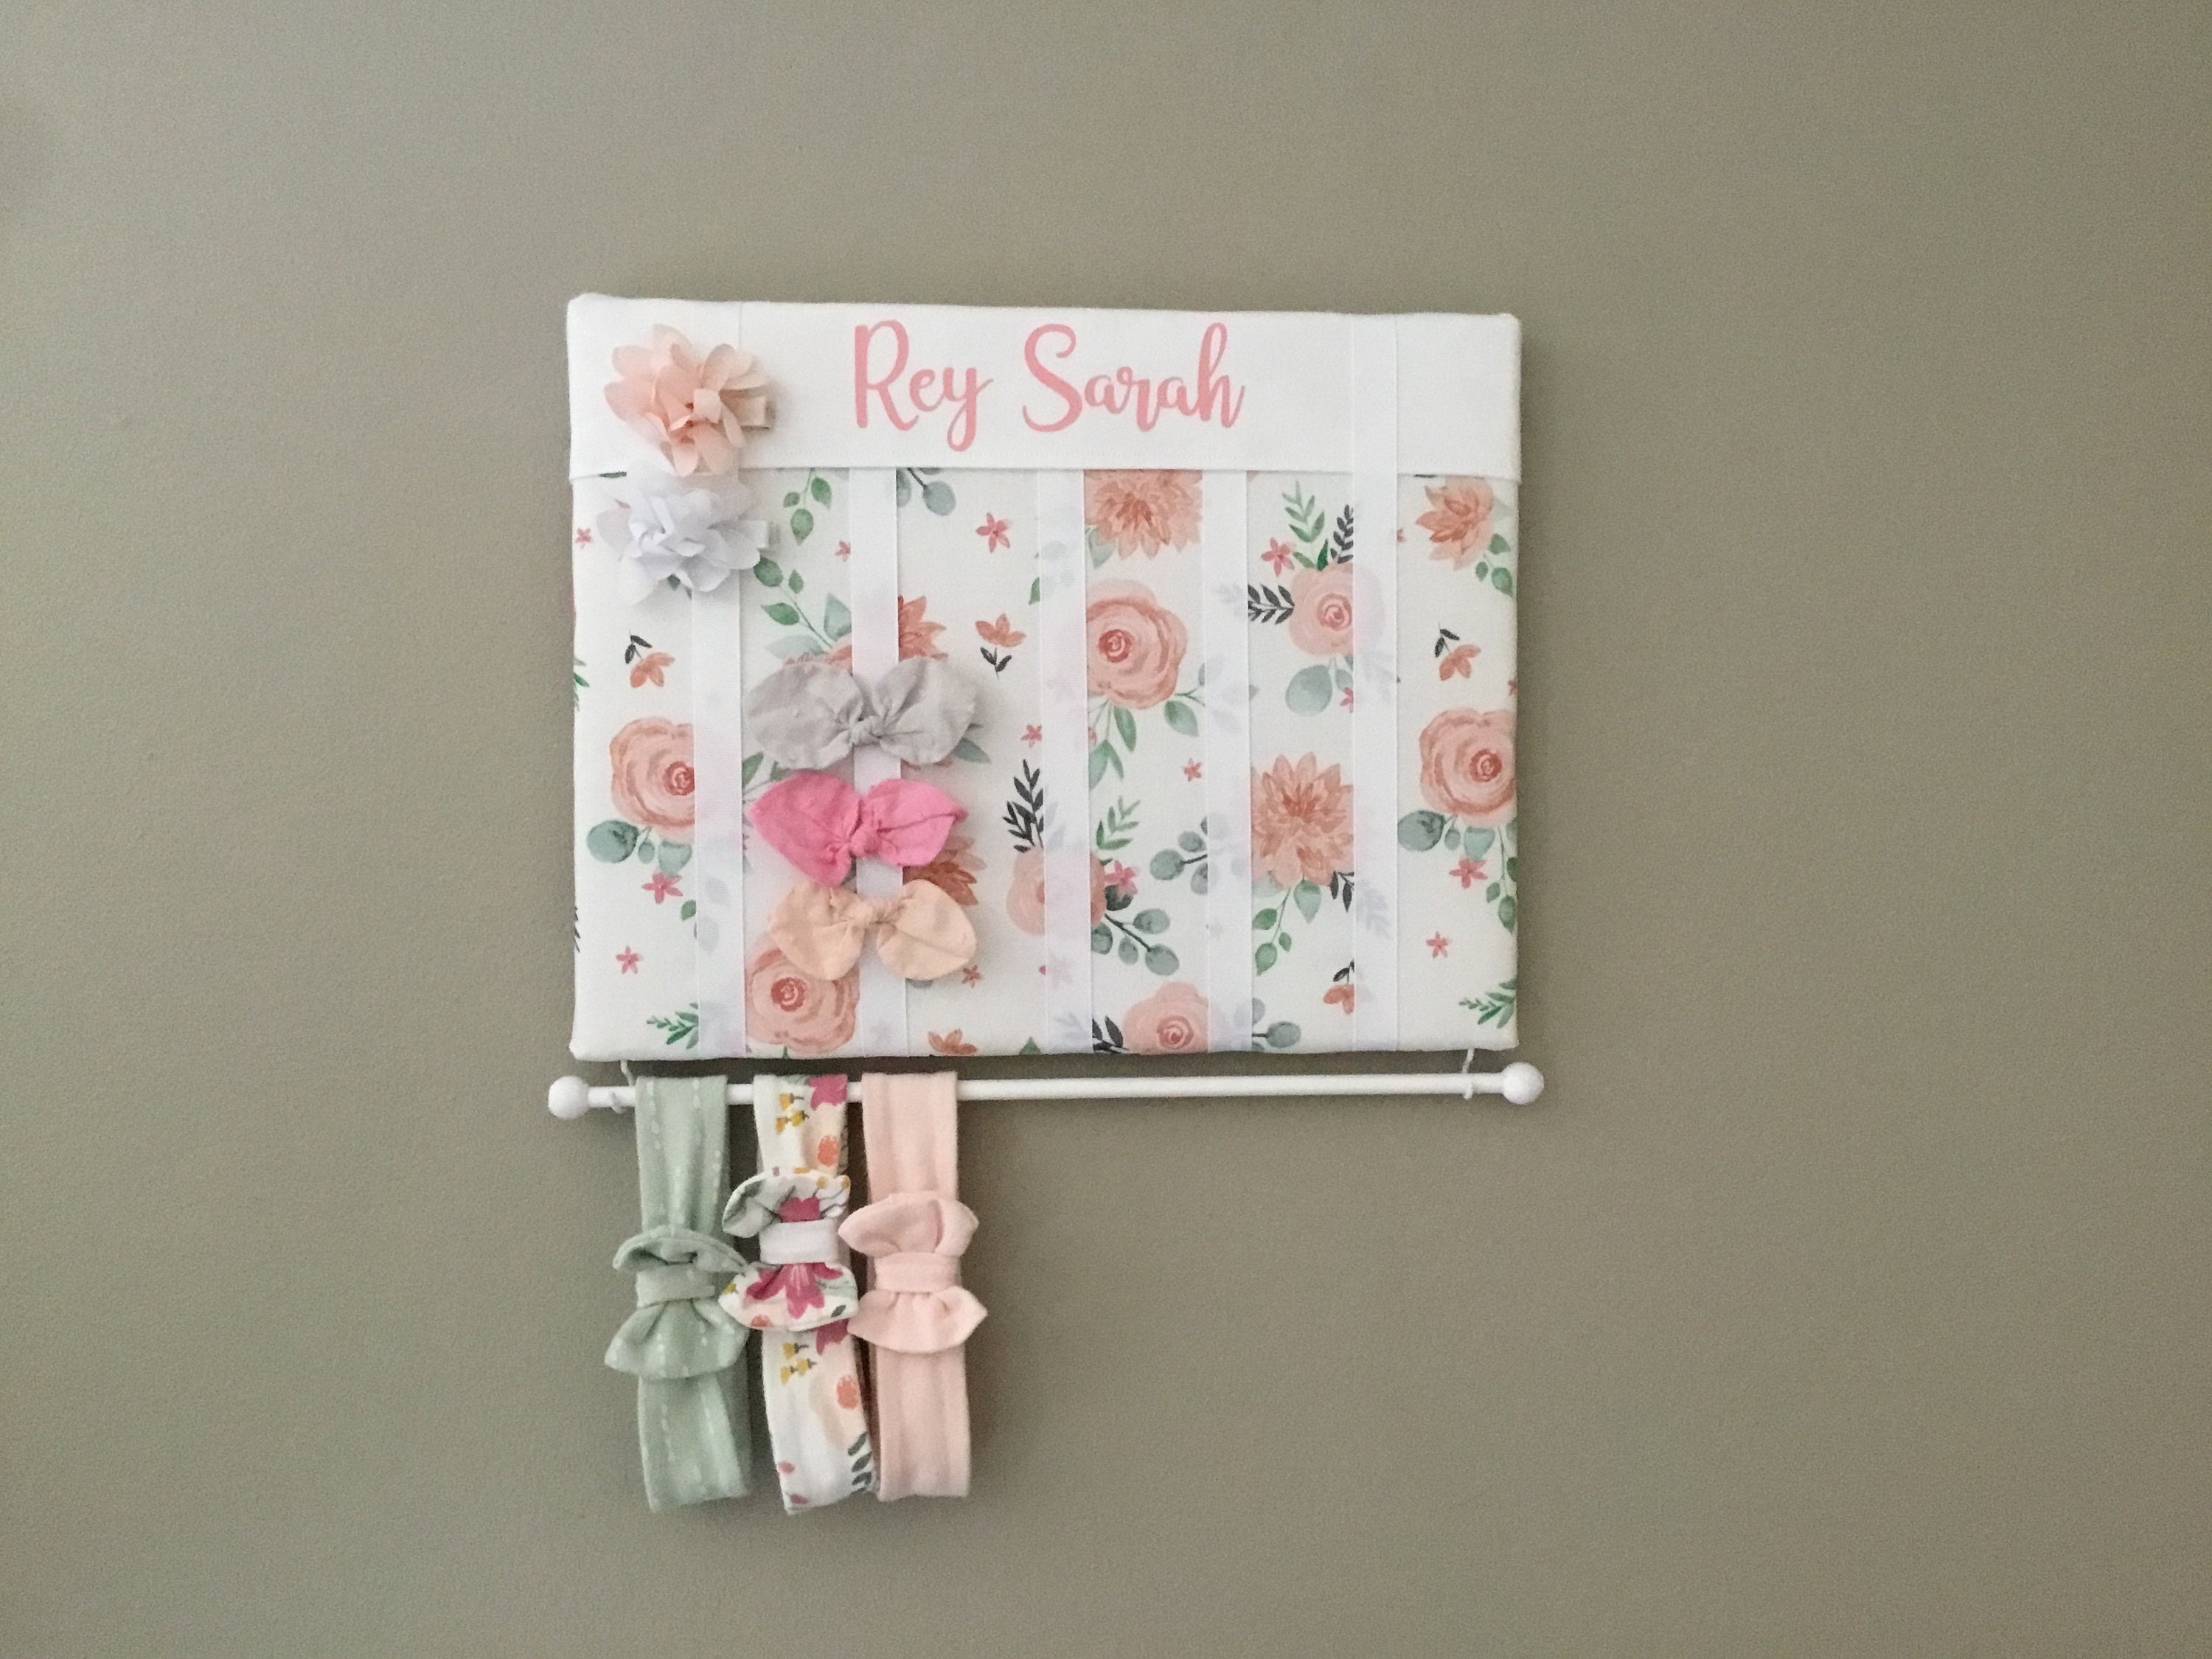 Nursery Headband Hanger, Nursery Decor, Gift for Baby Girl, Personalized  Nursery, Hairbow Holder, Bow Organizer for Girl, Baby Gifts H44 